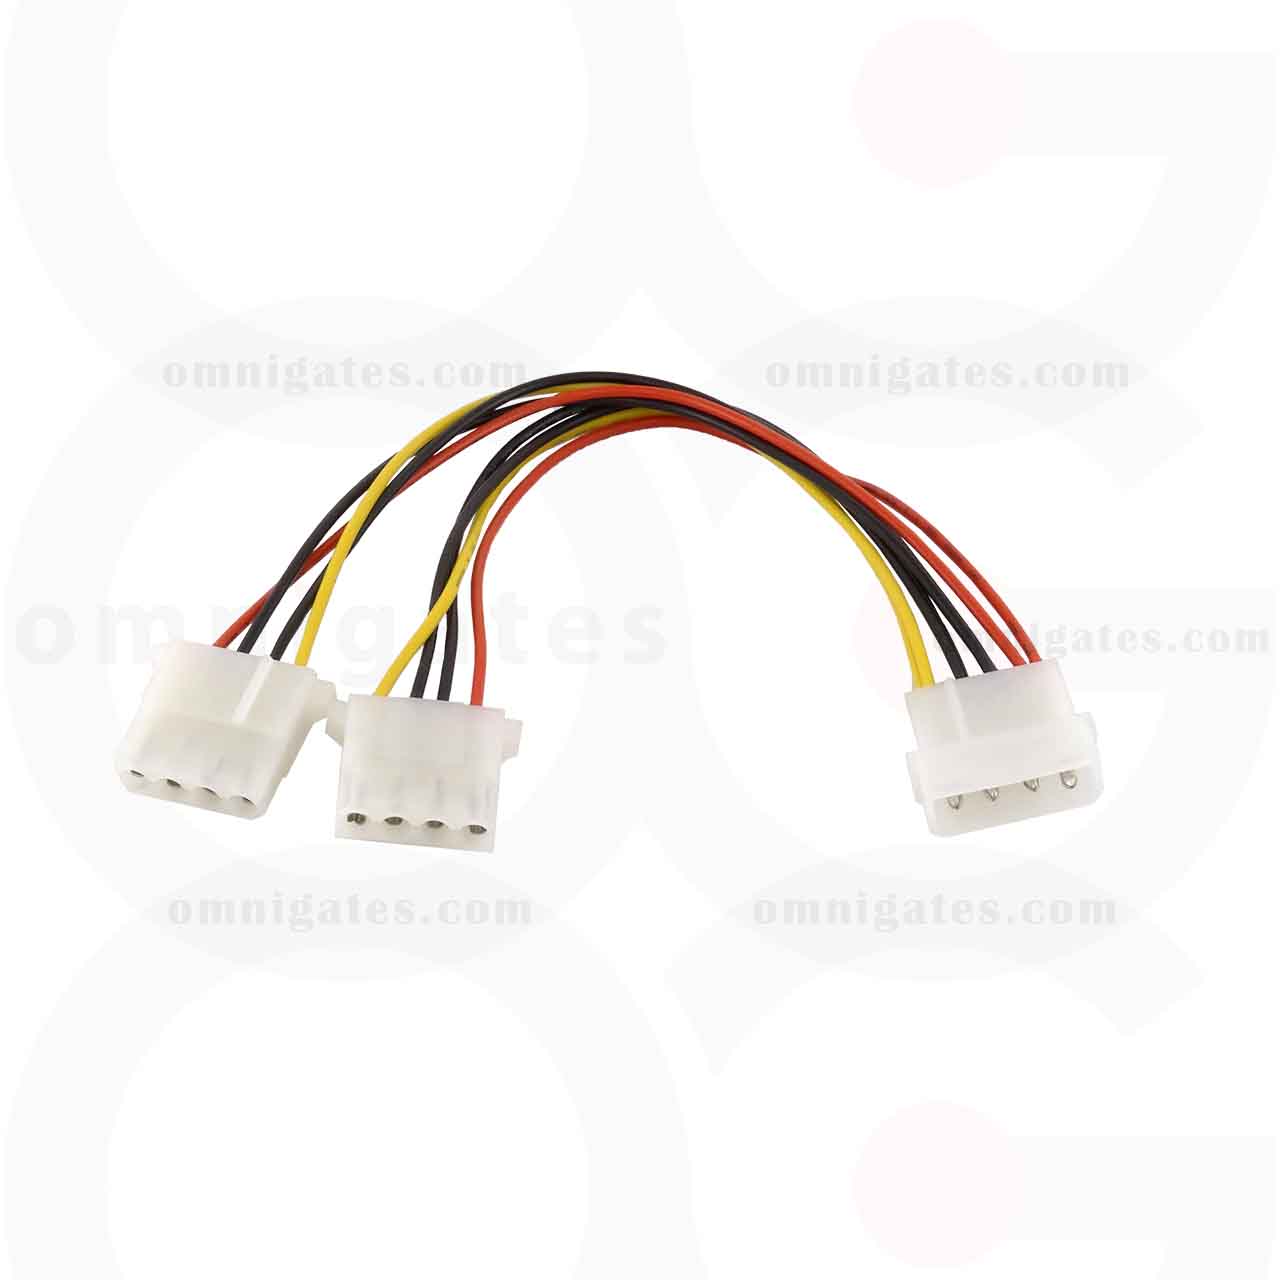 PCI Express 6 Pin to 5.25 Male x2, Internal DC Adaptor Cable, 10 